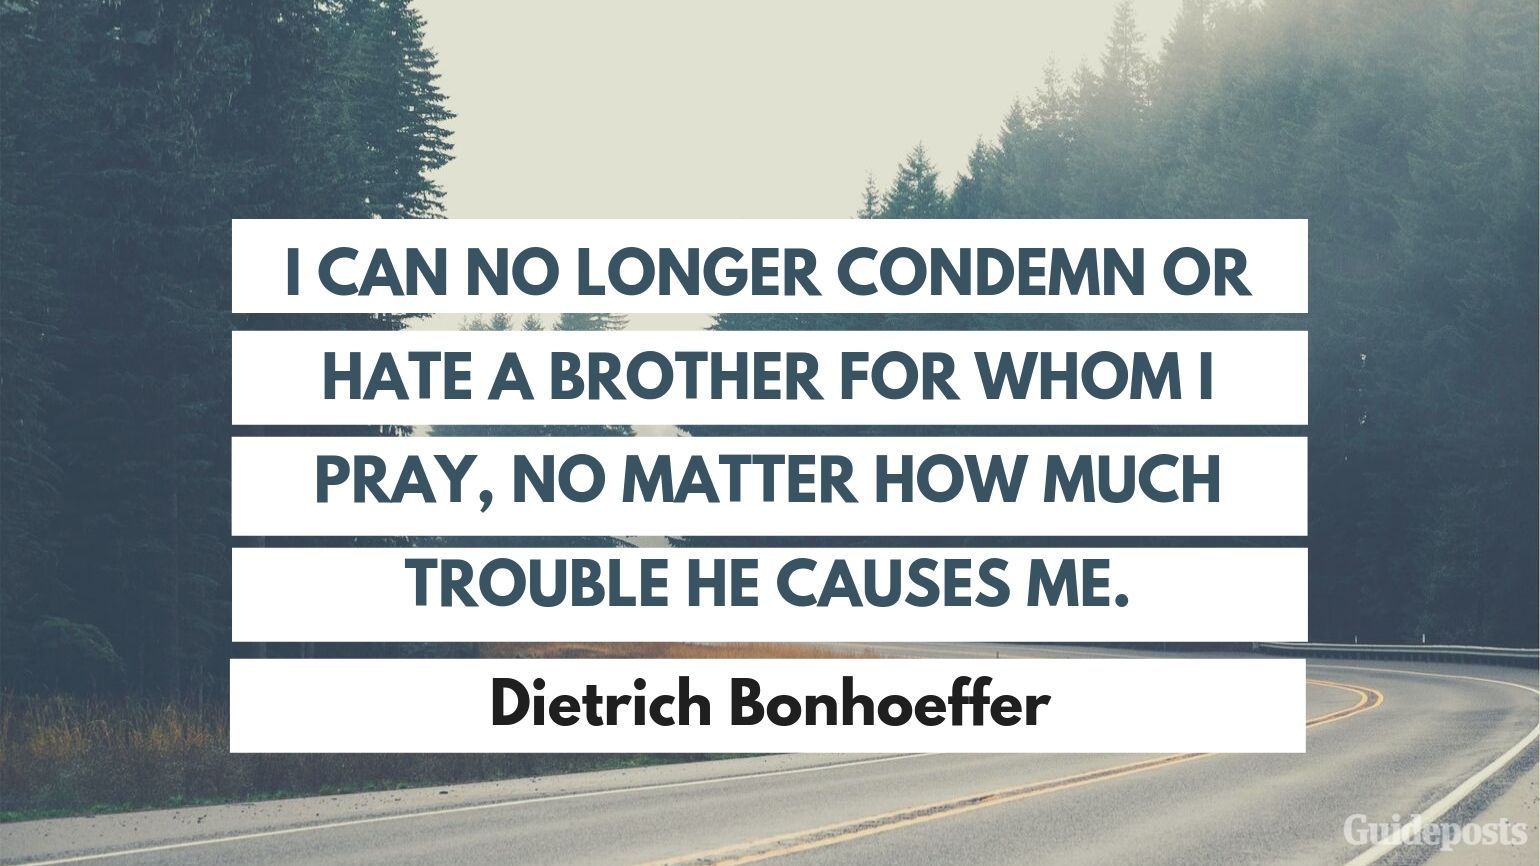 "I can no longer condemn or hate a brother for whom I pray, no matter how much trouble he causes me." Inspiration Inspirational Stories of Faith